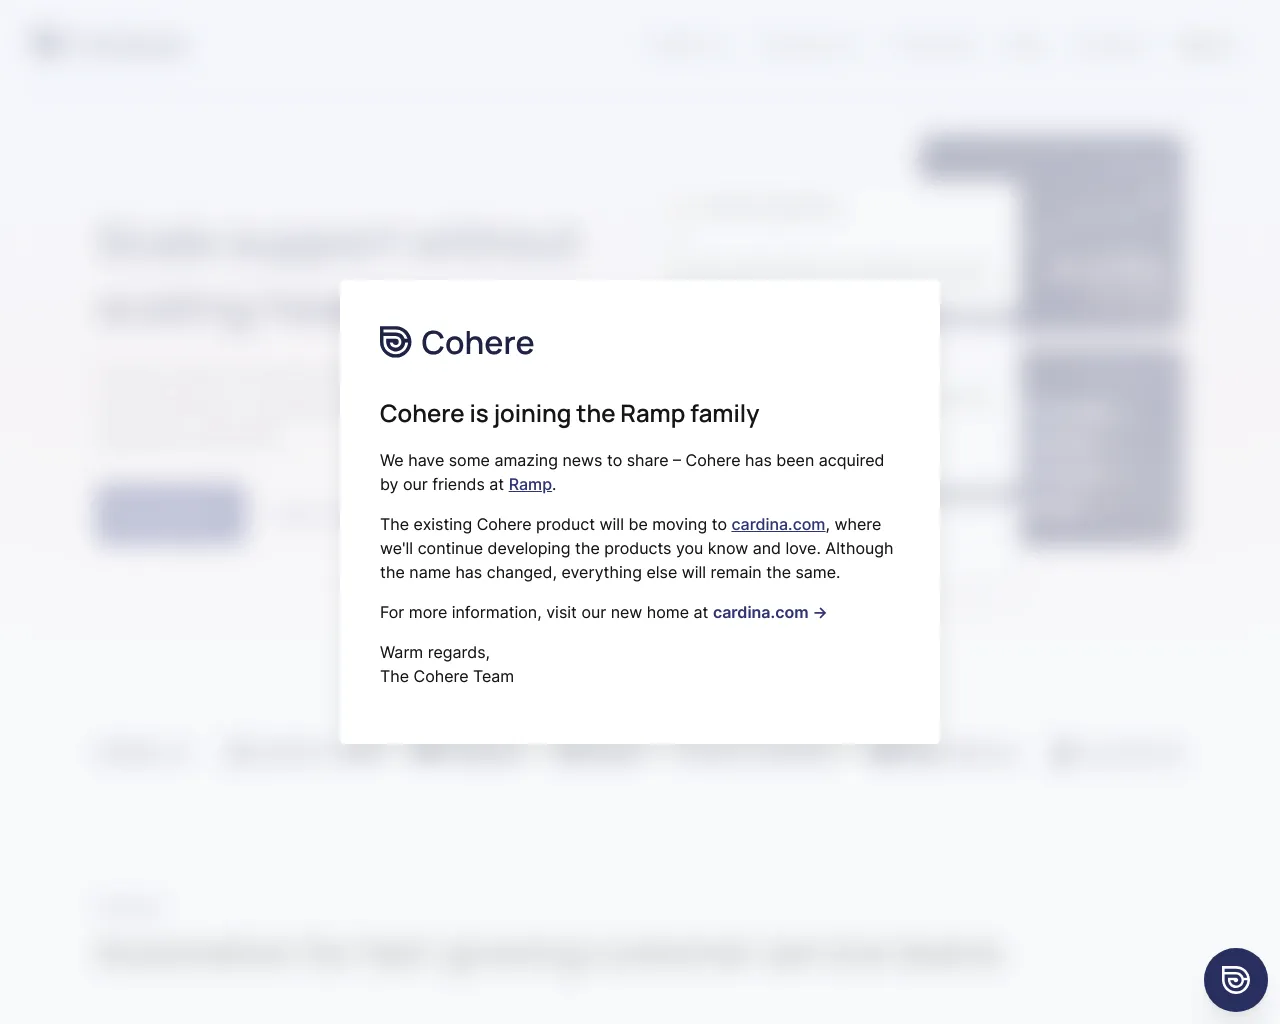 Conversational AI Platform for Customer Support - Cohere